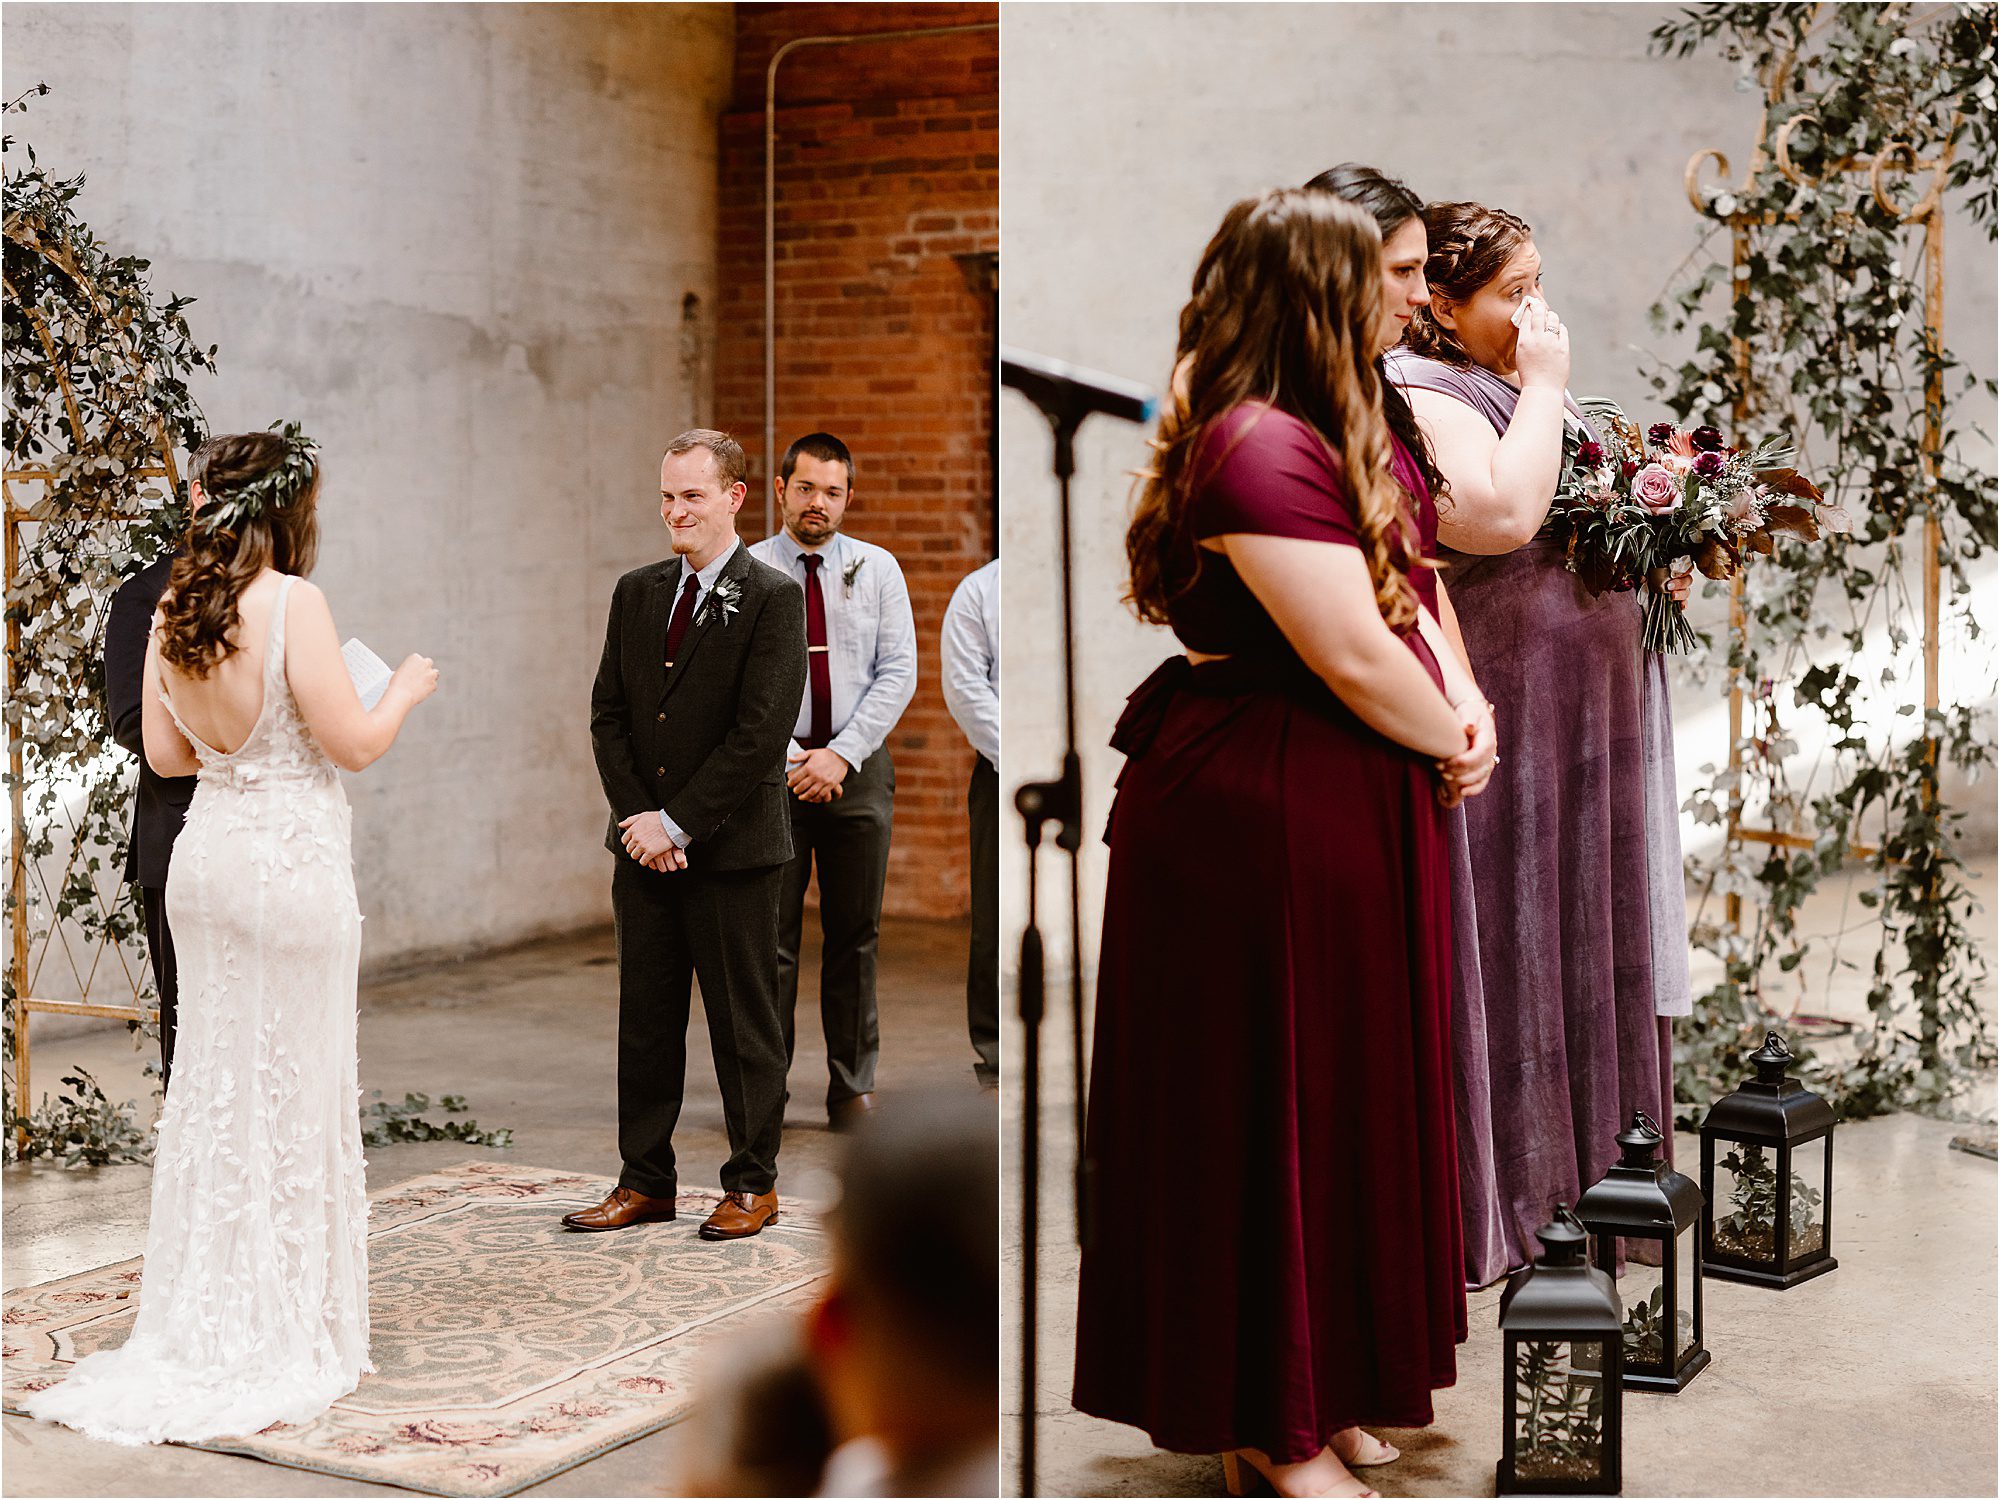 bride and groom exchange intimate vows at wedding ceremony with attendants crying